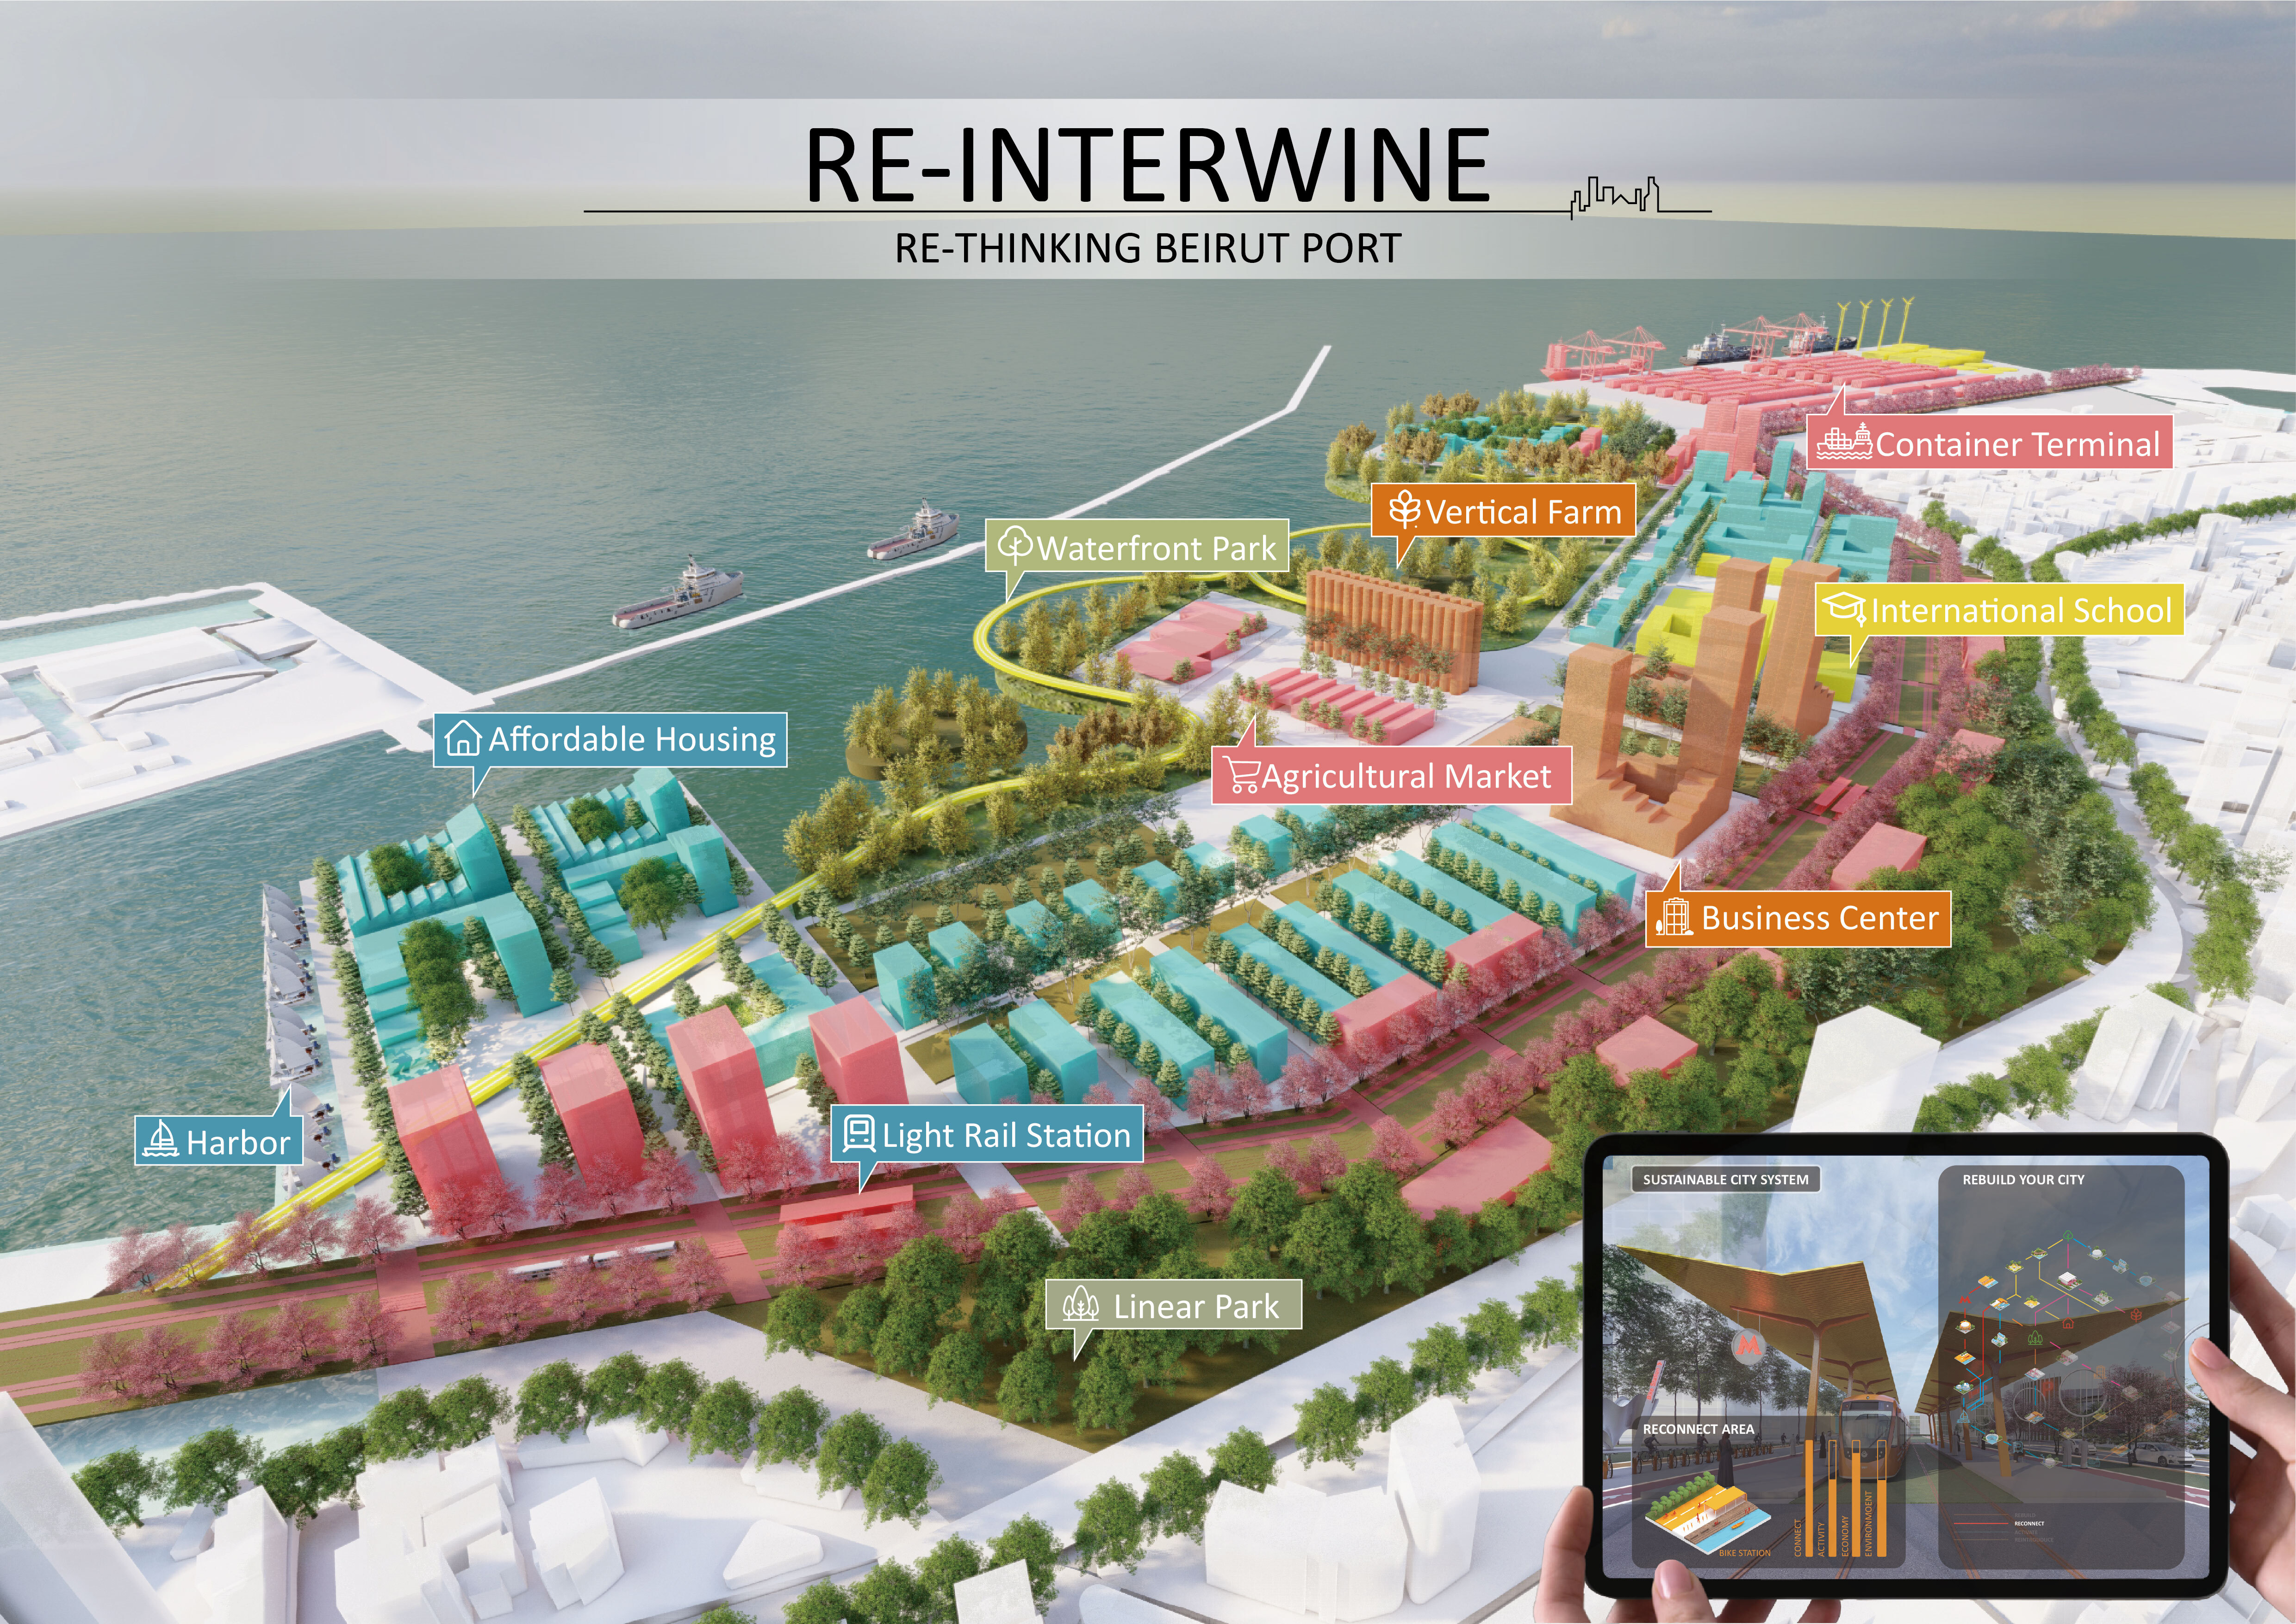 Wan-Xuan Wu and Qin-Chao Zhou, considering economic, design, construction, and operational aspects, strategically planned the reallocation of the Beirut Port area.